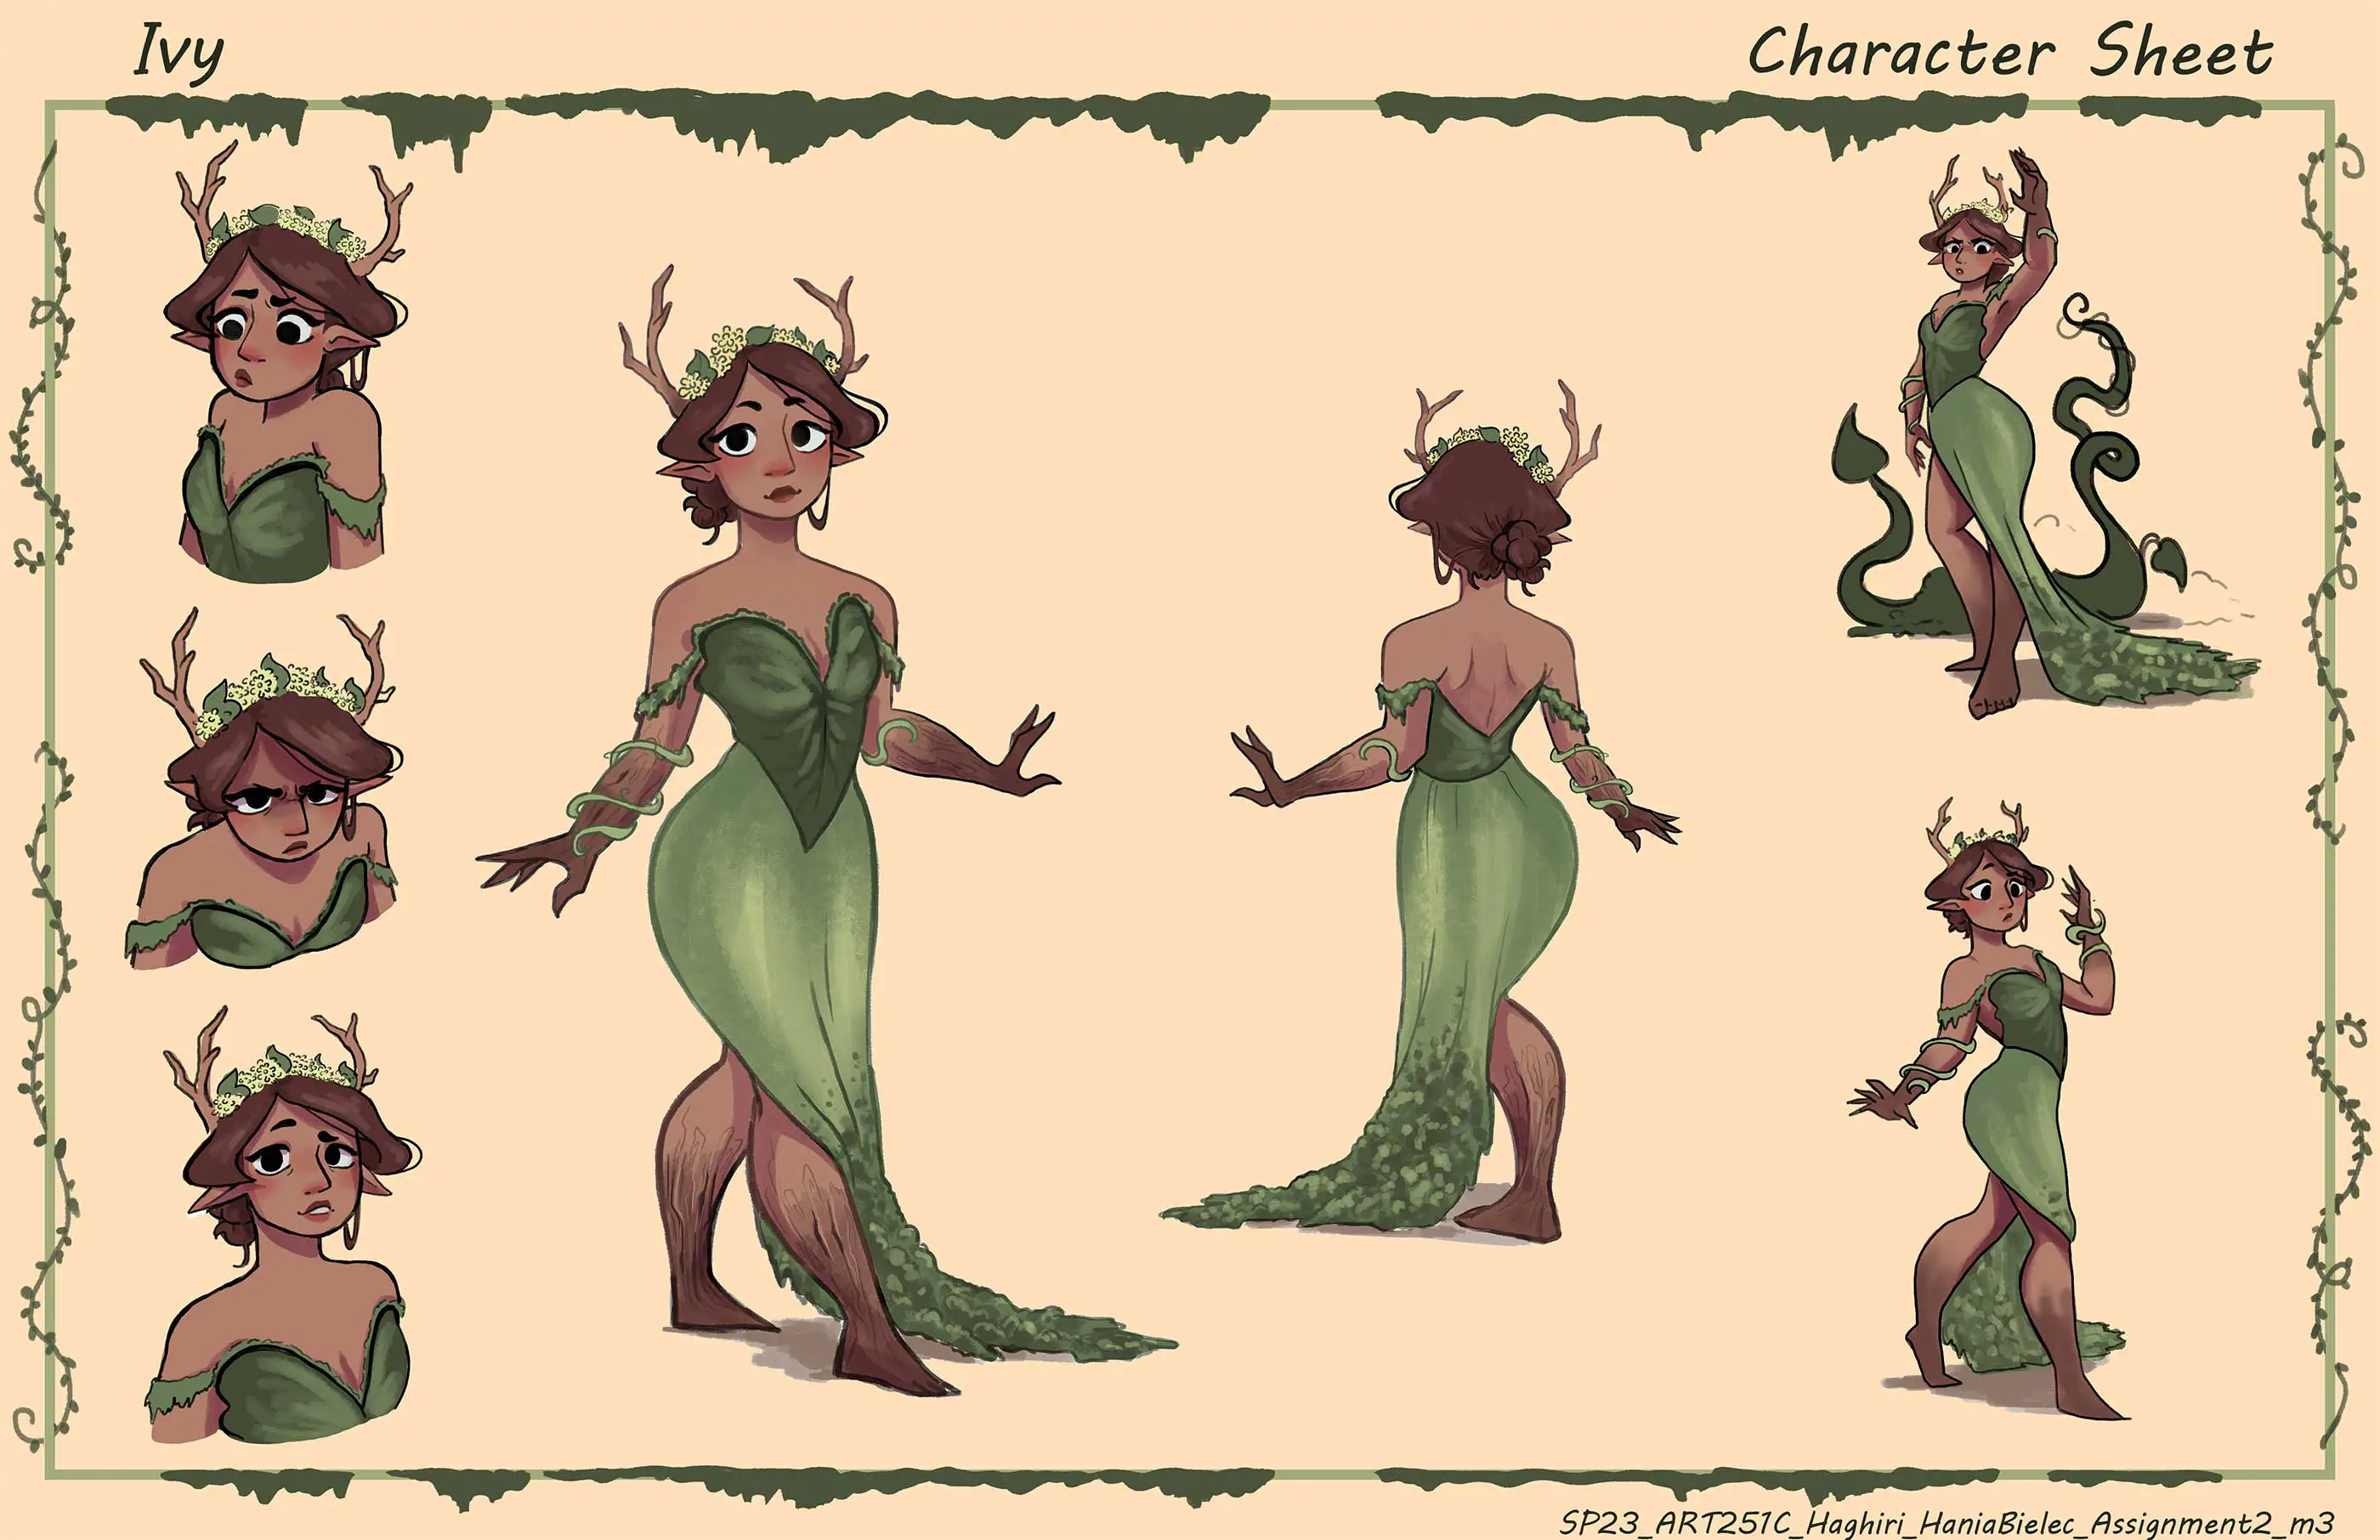 A collection of drawings of a woman with antlers in a green dress.